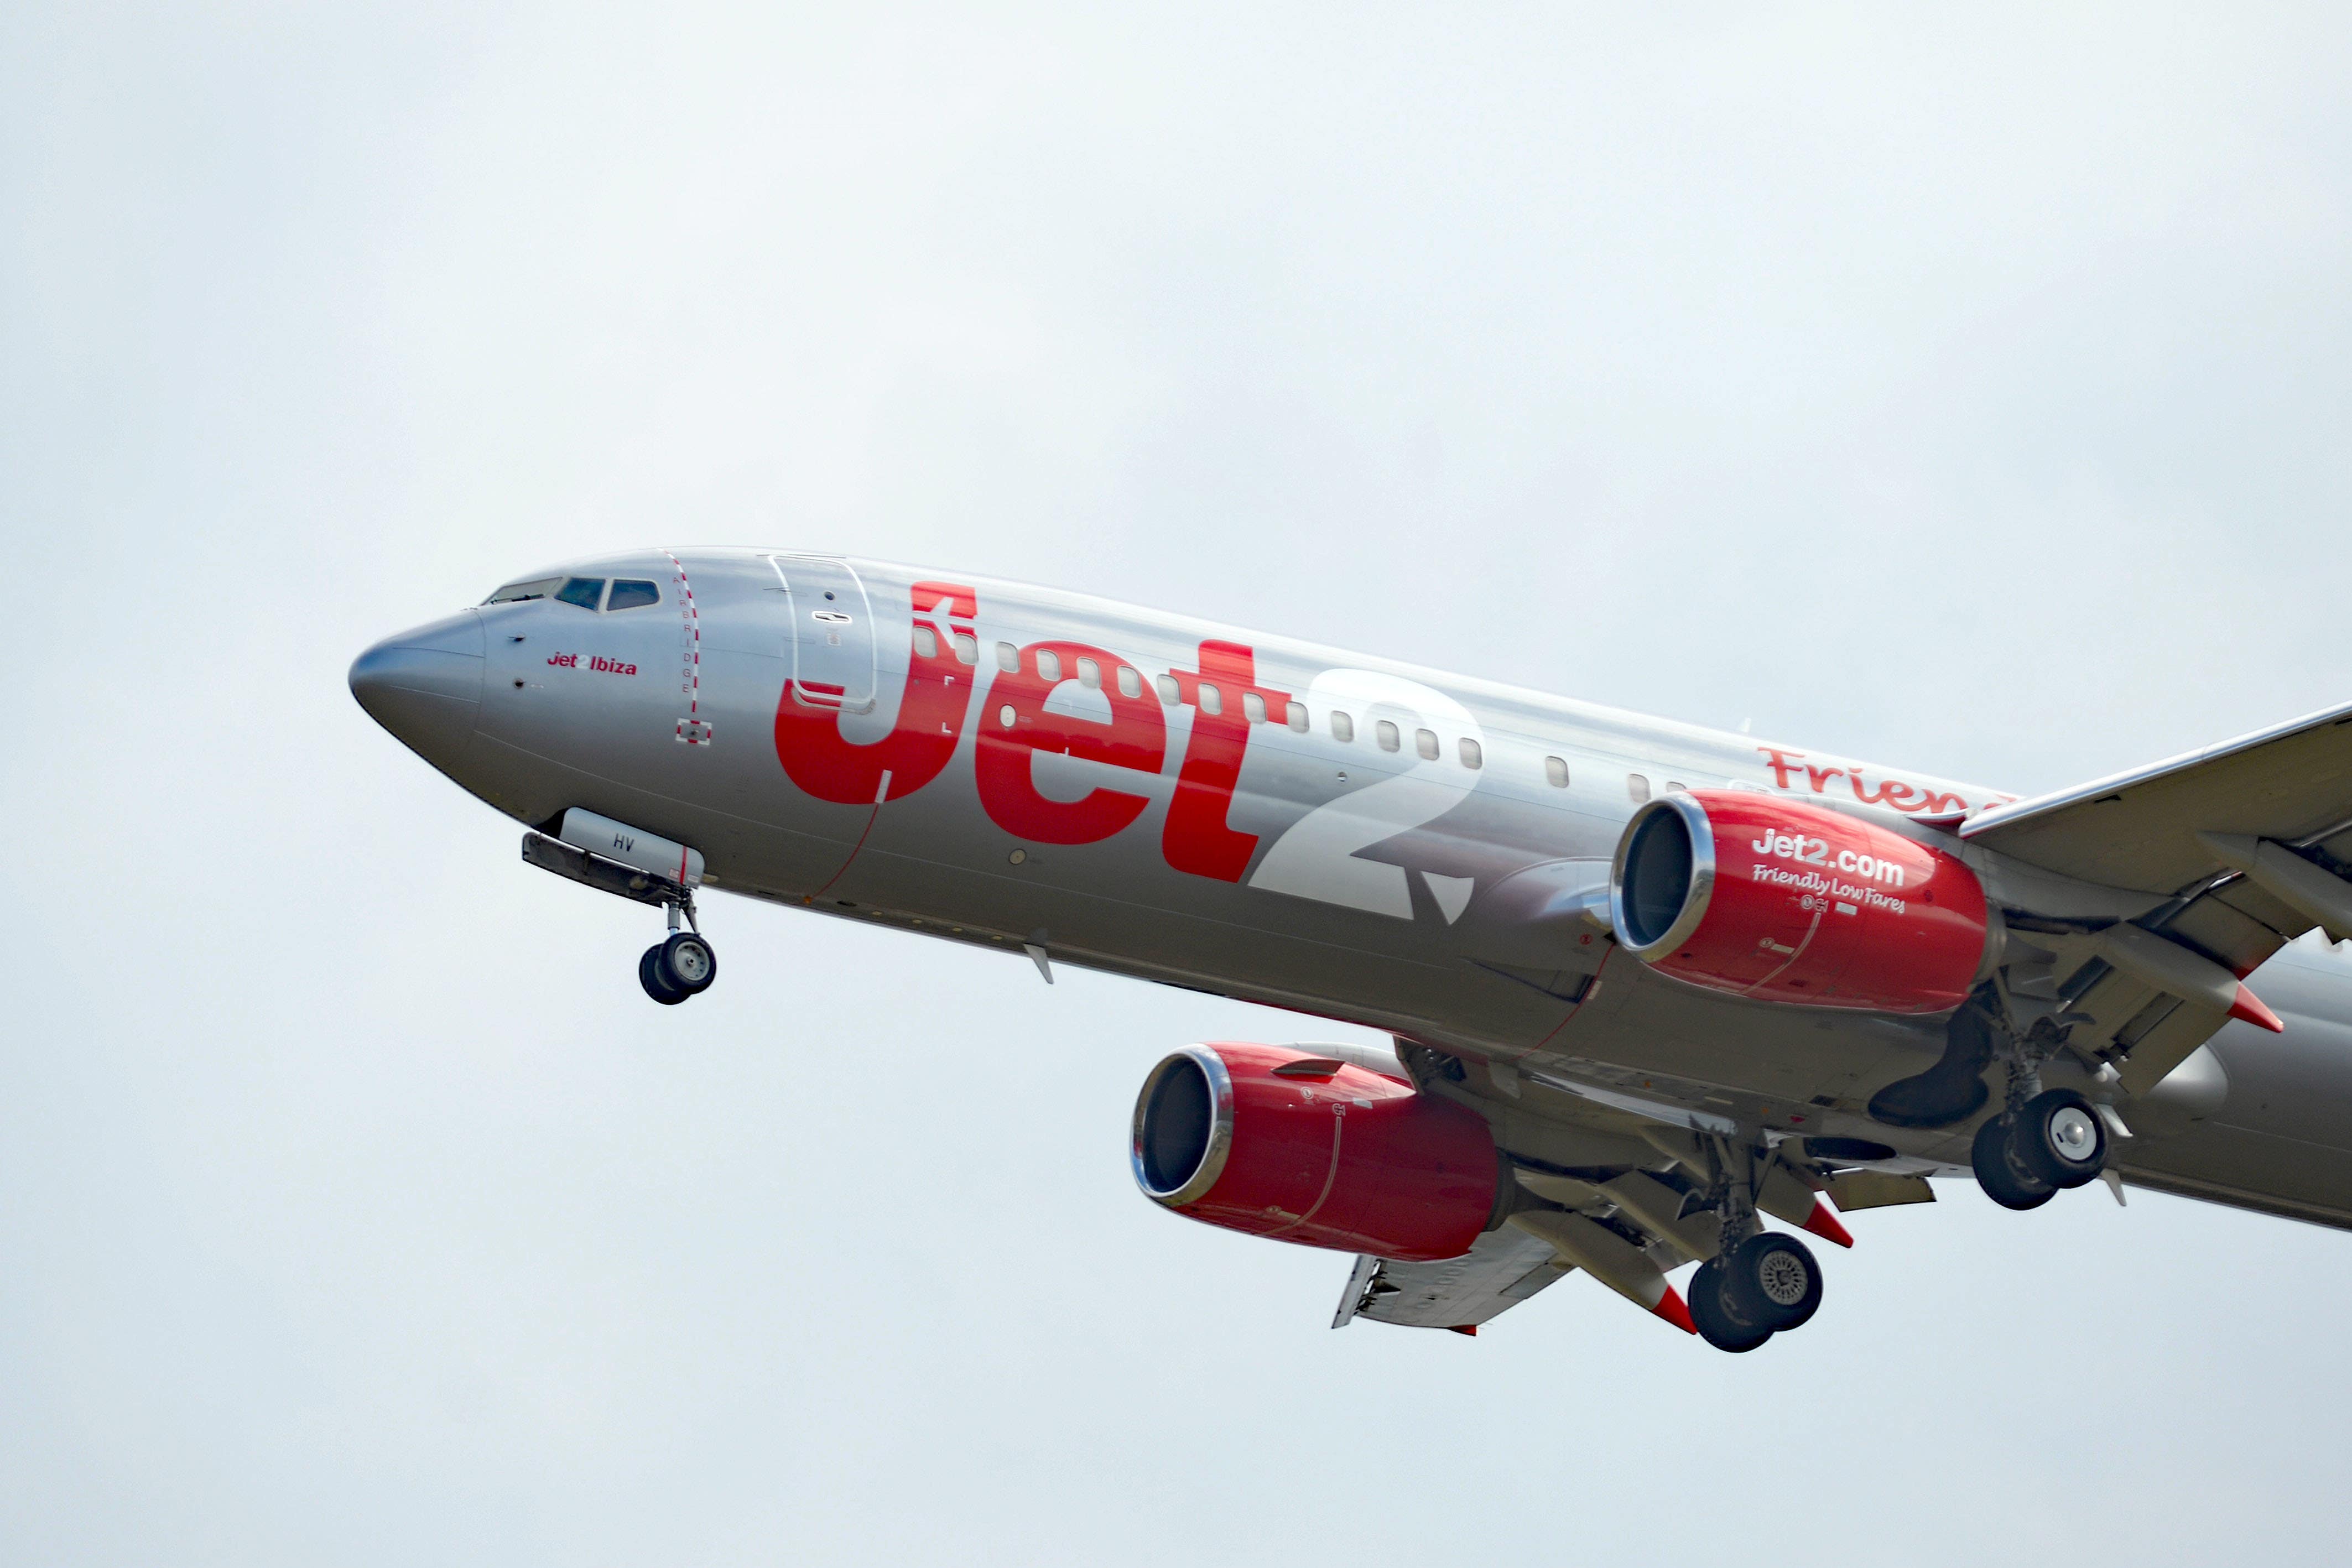 Holiday firm Jet2 has said full-year earnings will be better than expected after swinging to a first half profit, despite a hit of more than £50 million from airport chaos.